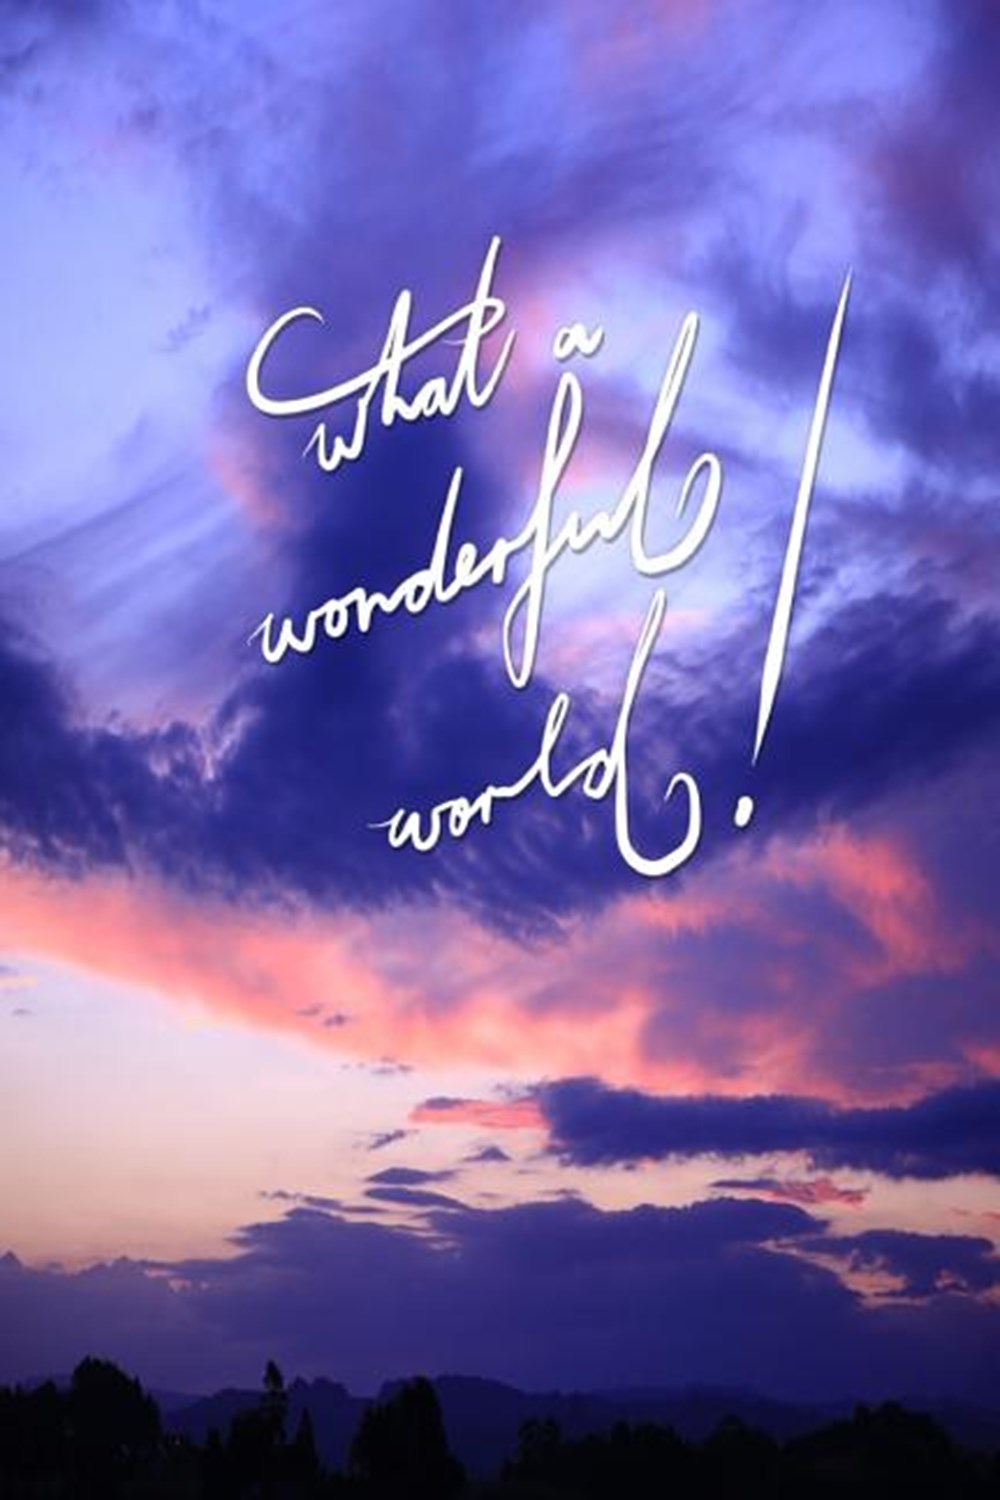 What a Wonderful World 6x9 Inch Lined a Journal Designed to Remind You That It Really Is a Wonderful